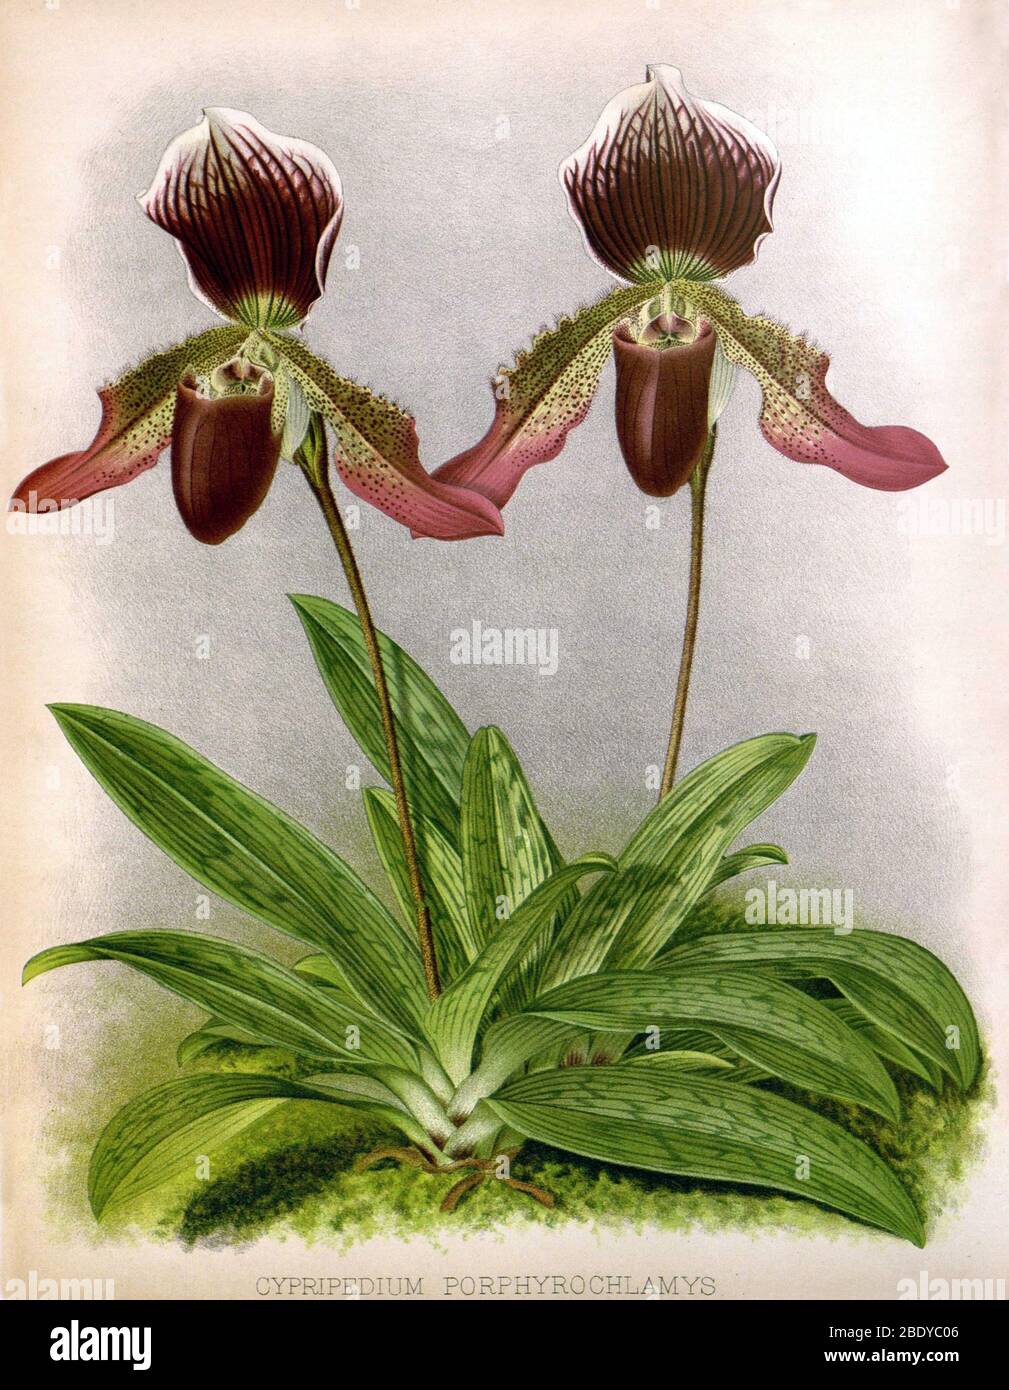 Orchid, Cypripedium porphyrochlamys, 1891 Banque D'Images